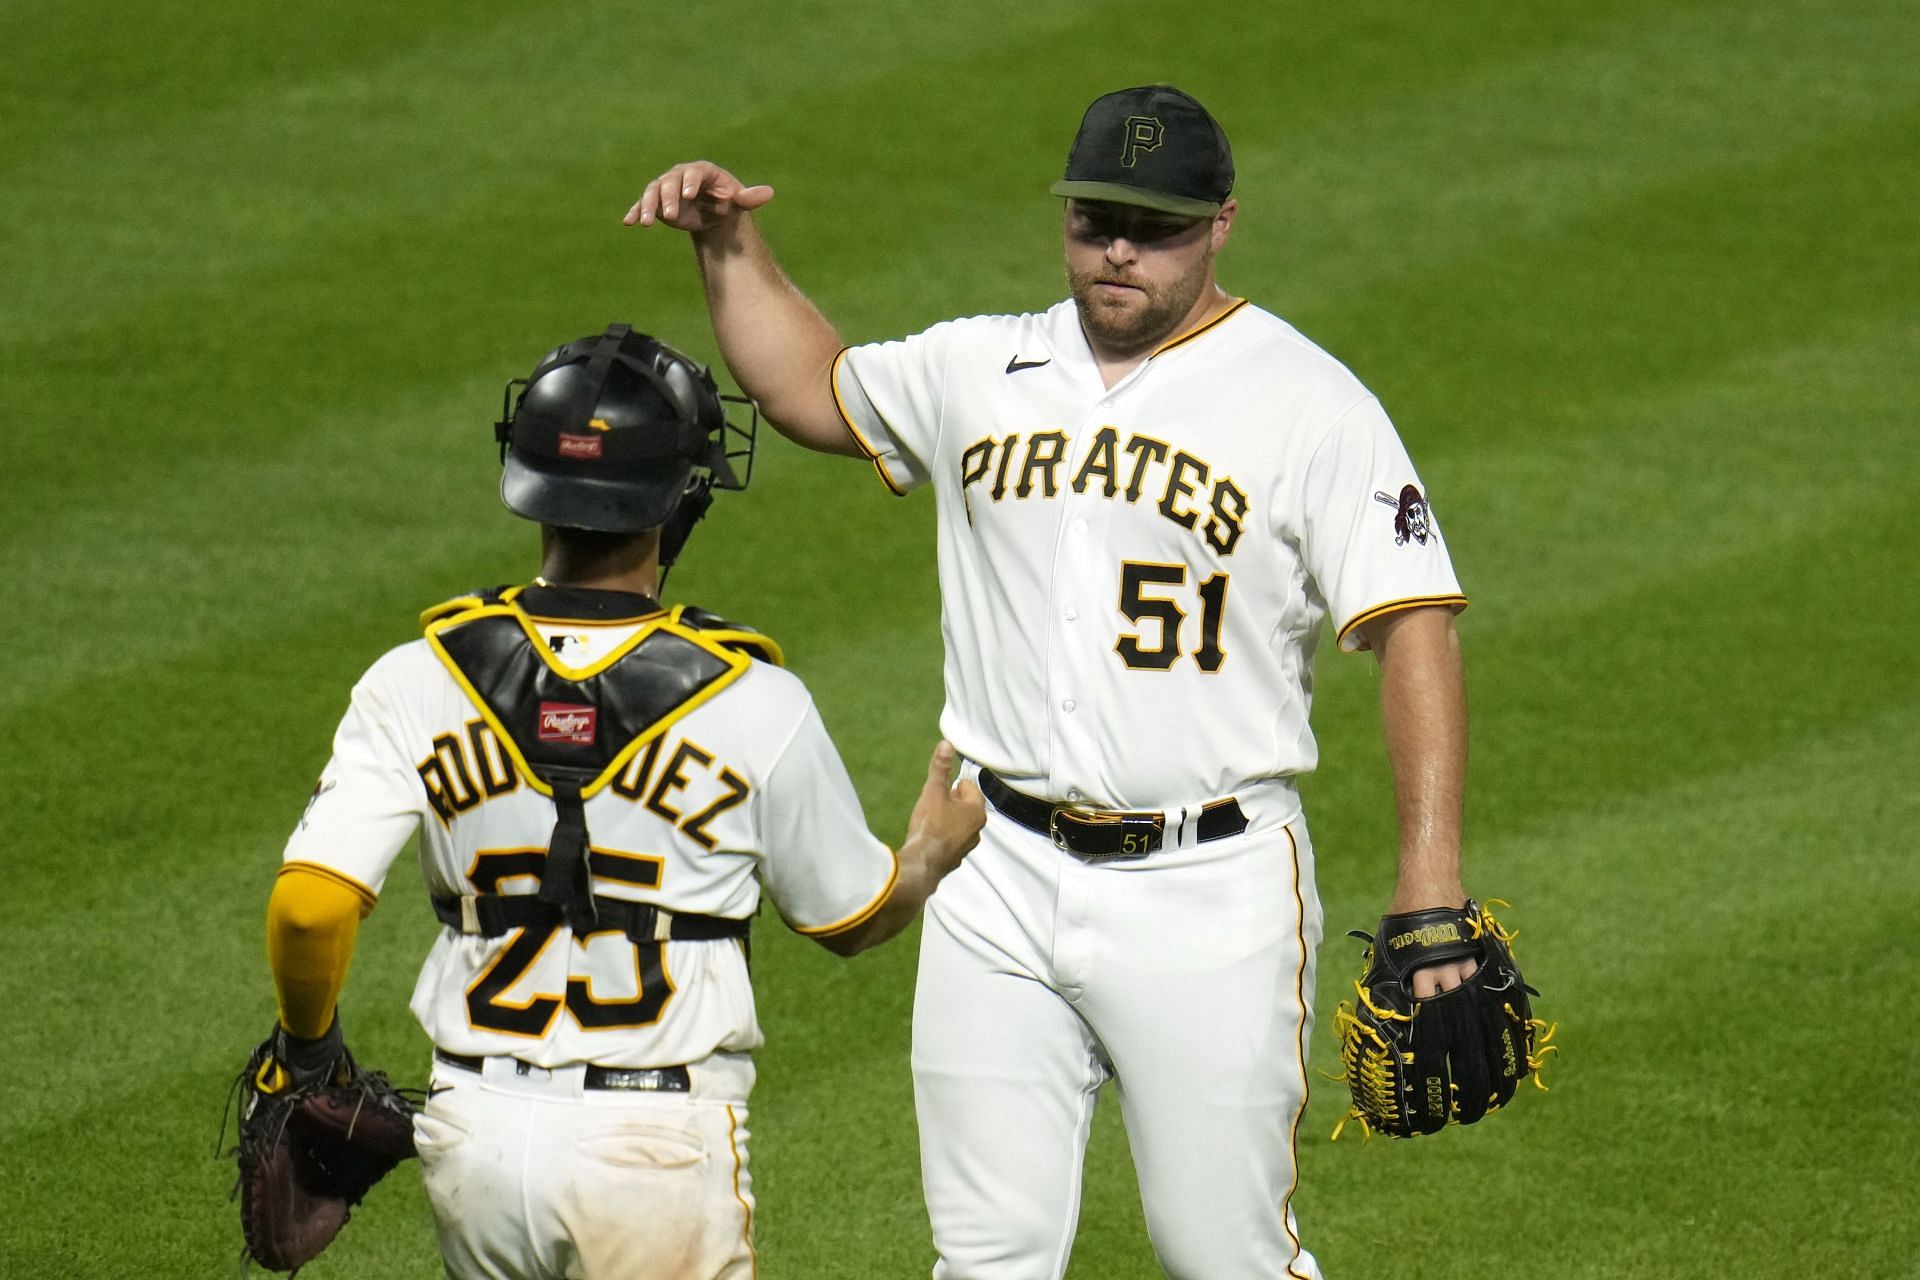 MLB Analysis: Paul Skenes effect proves if you build it, Pirates fans will  come to any ballpark - Bucs Dugout